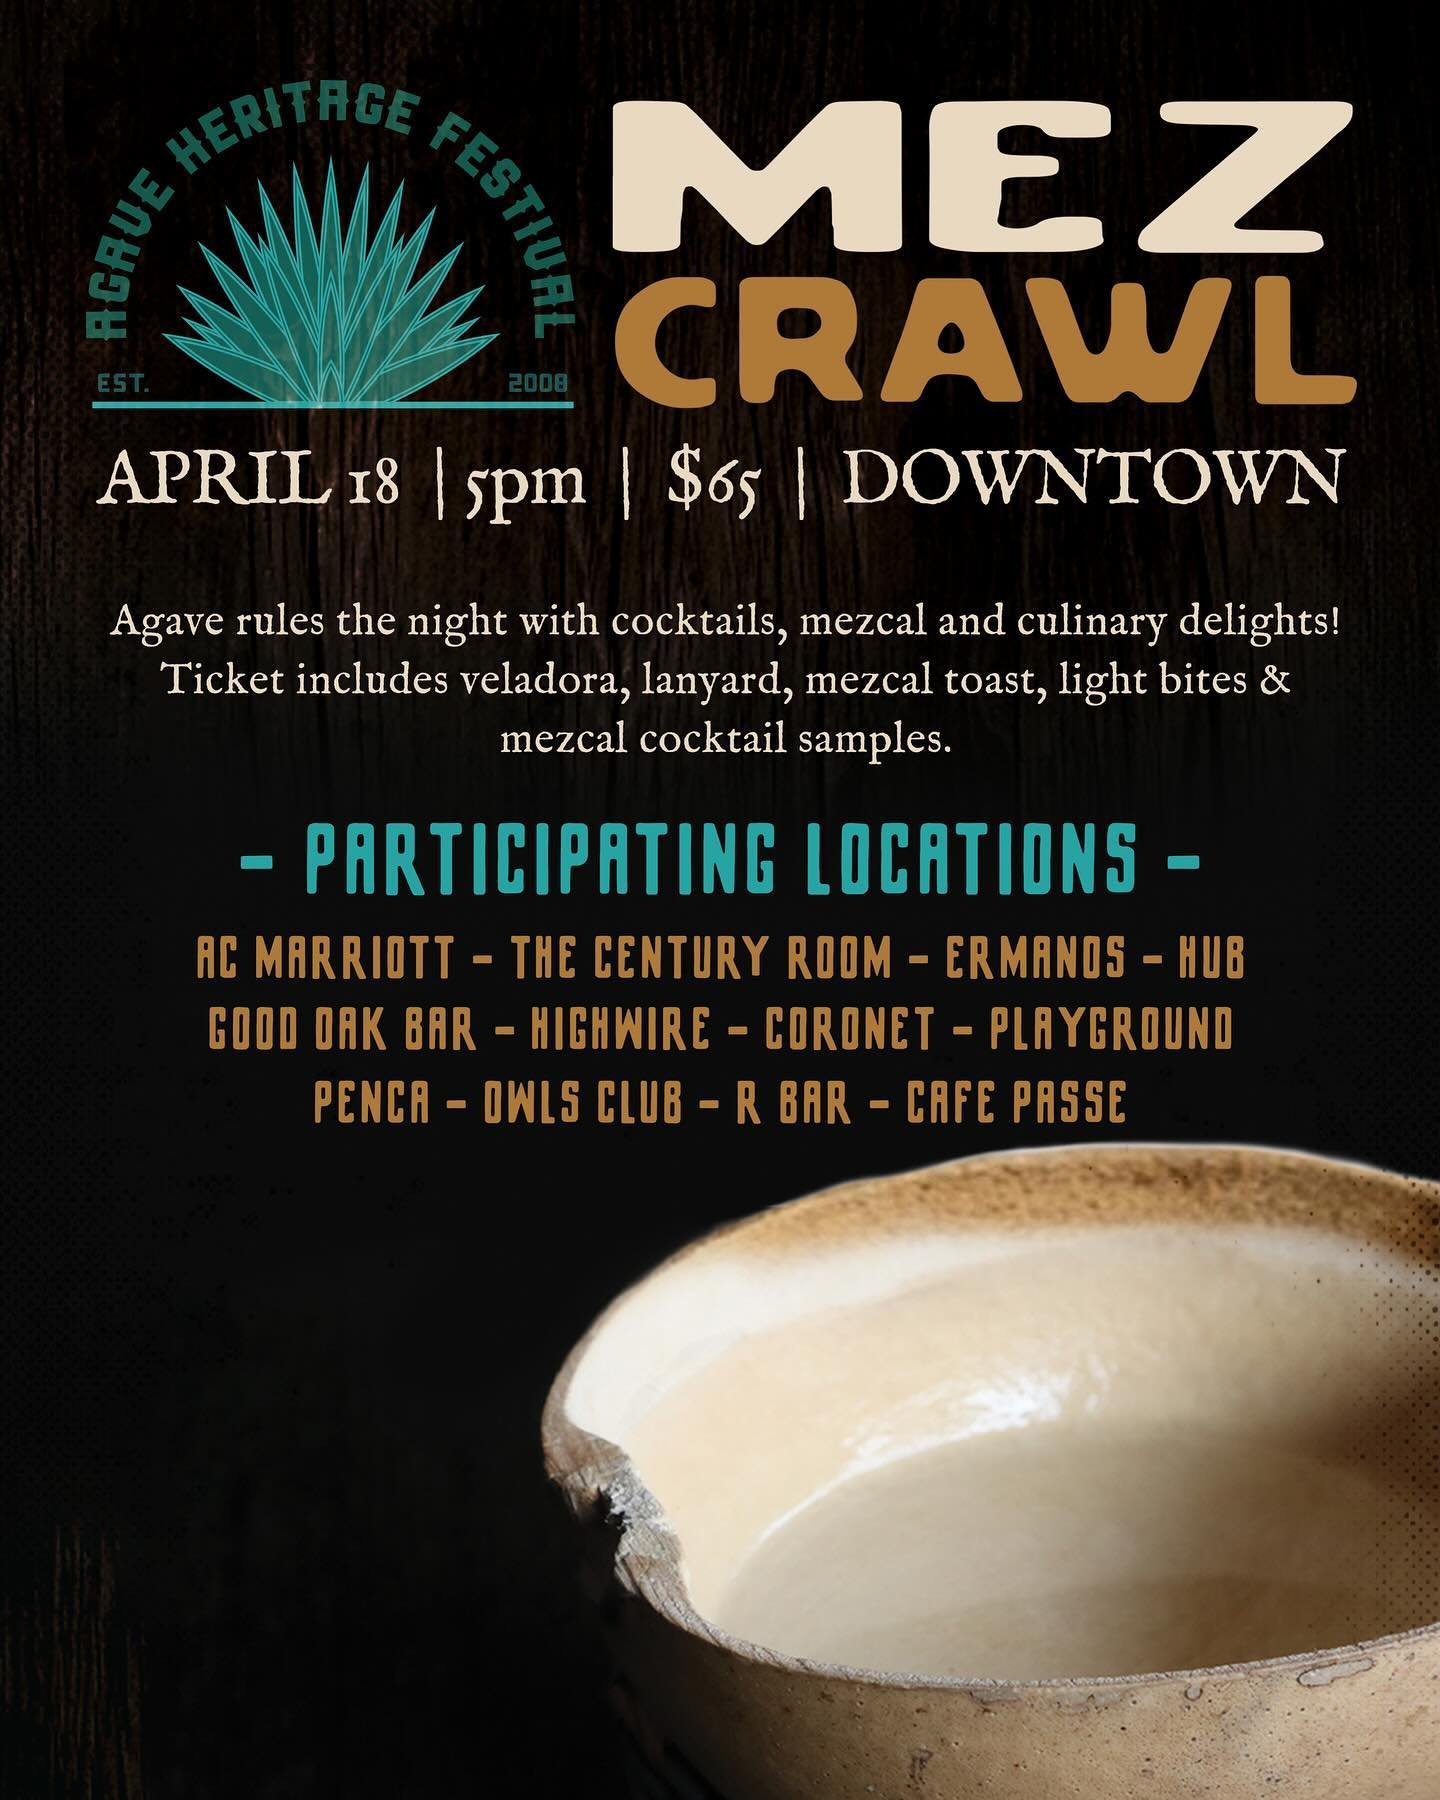 🌵Join us for an unforgettable night celebrating the spirit of agave at Mezcrawl  THIS Thursday, April 18 from 5-11PM in @downtowntucson ! 🌙✨

Get ready to immerse yourself in the rich flavors of mezcal and culinary delights as we kick off the eveni